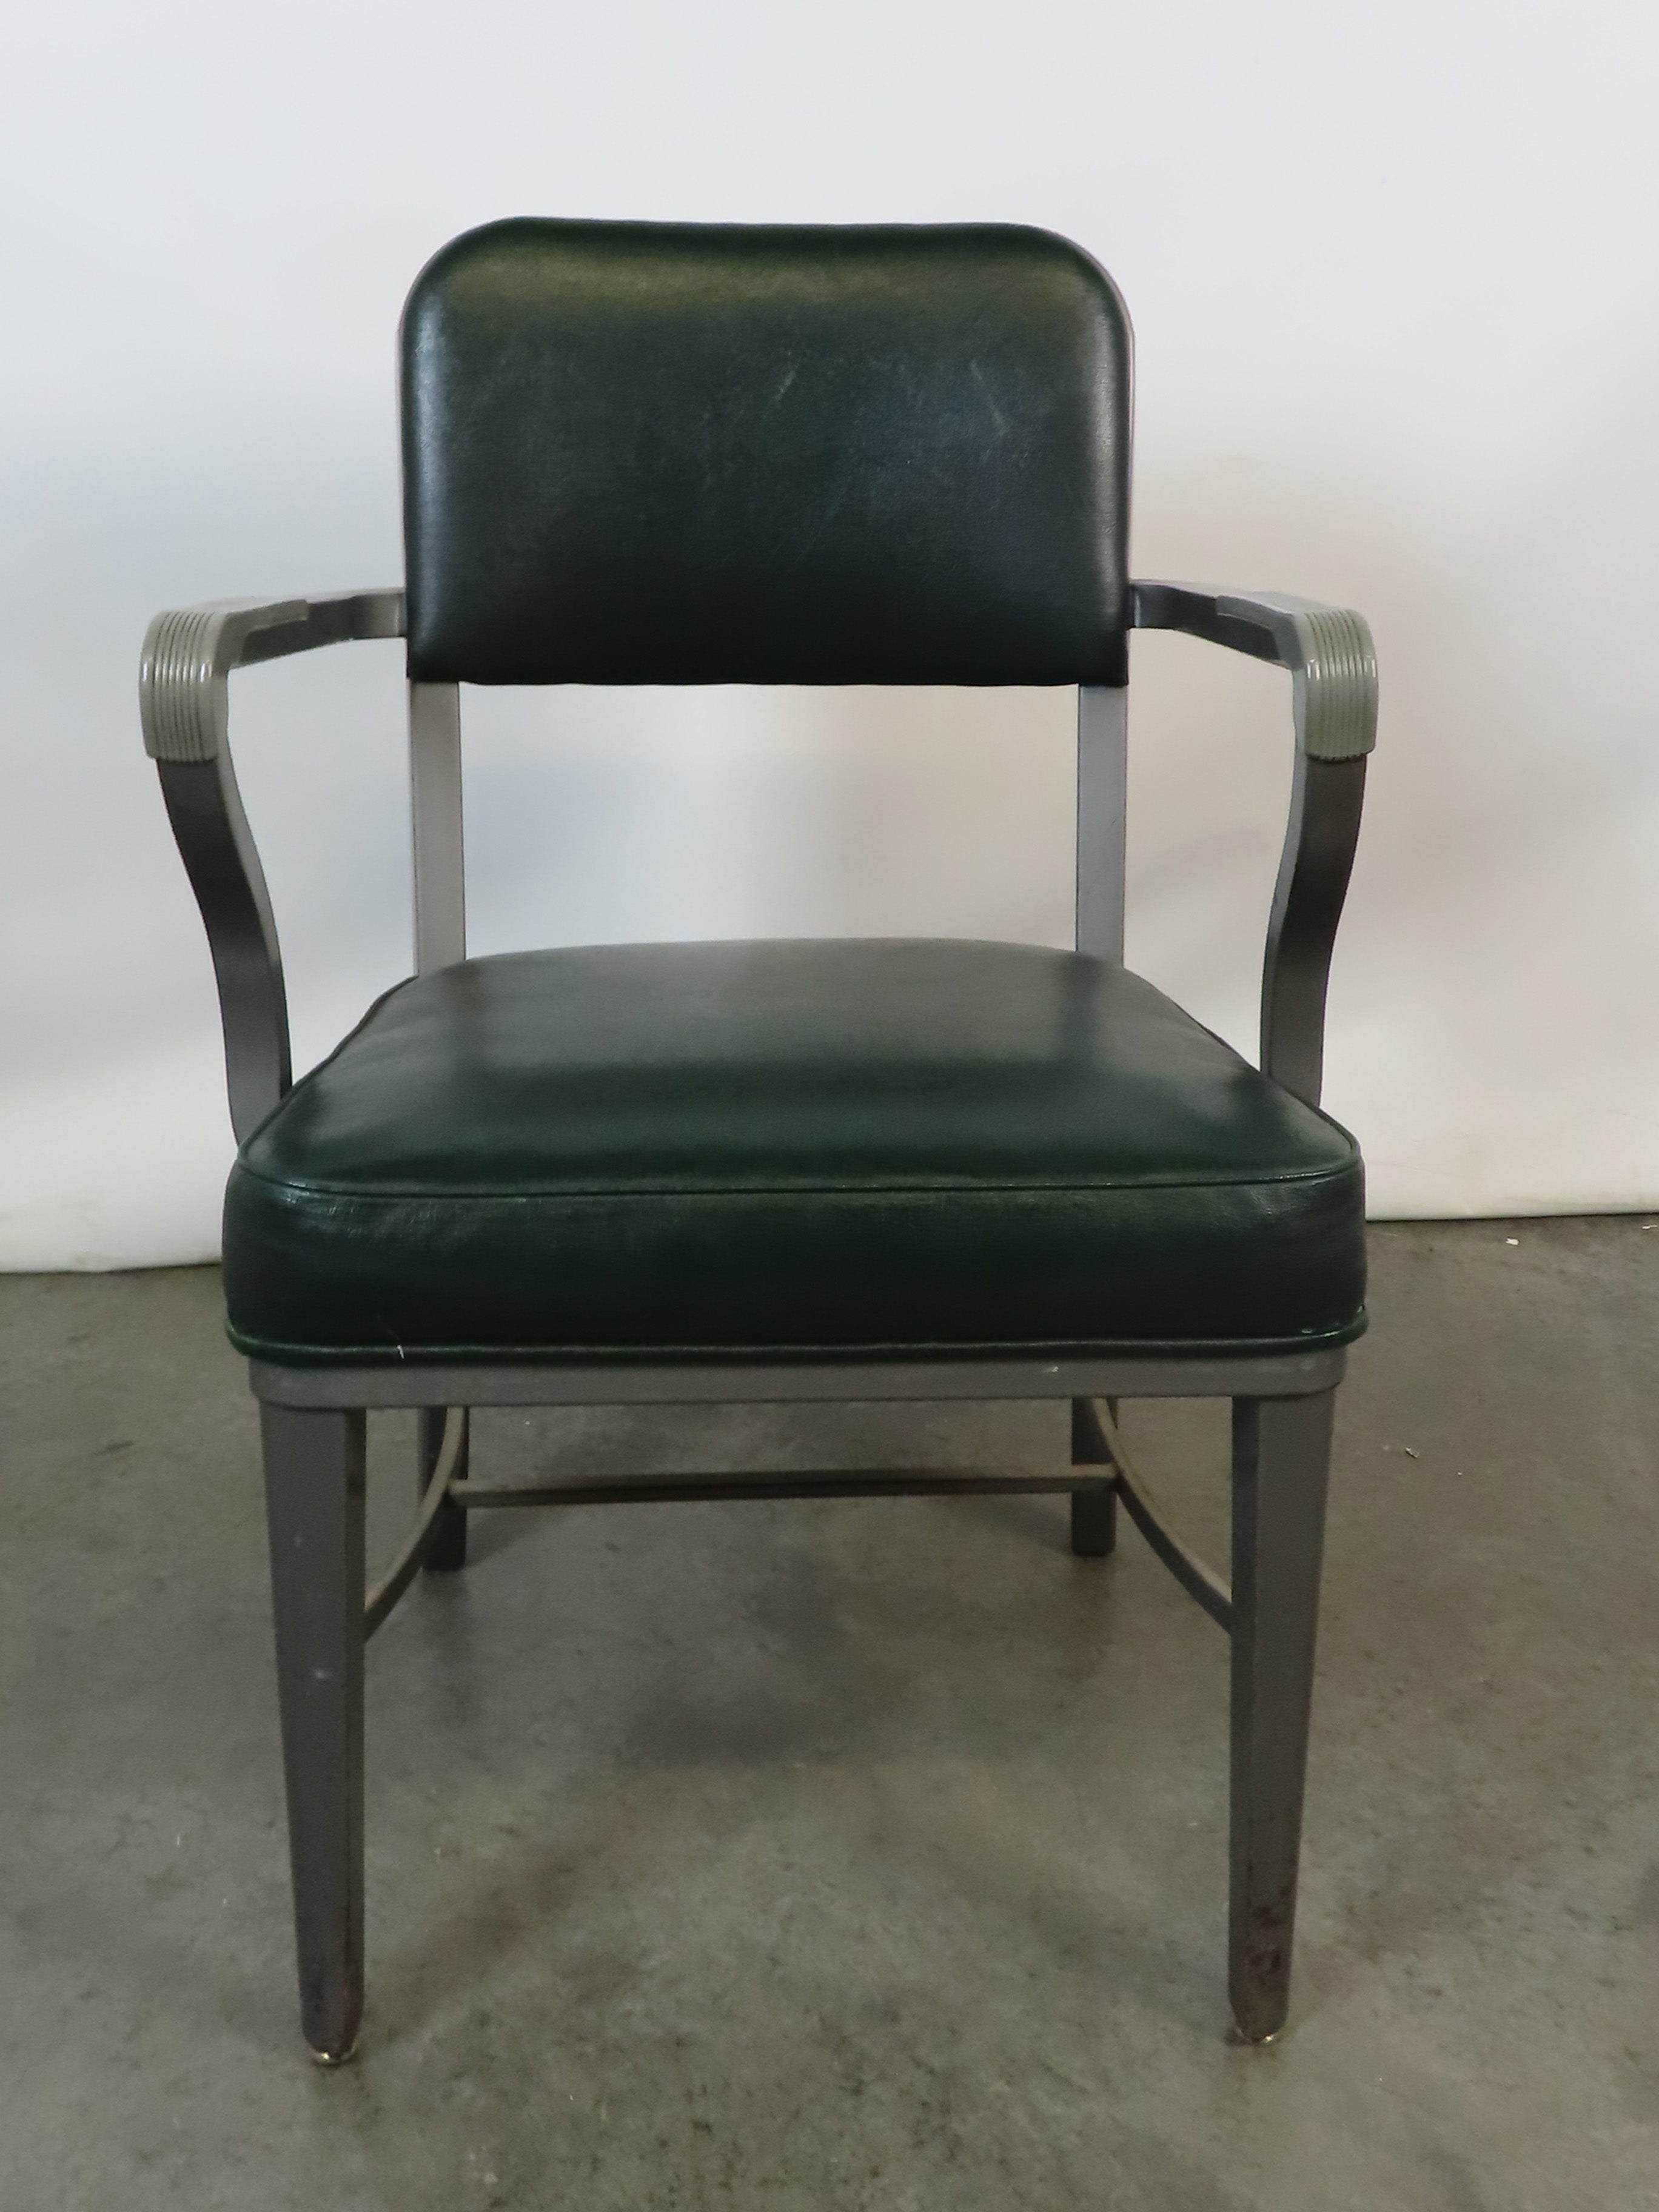 Steelcase Green Tanker Chair with Arms